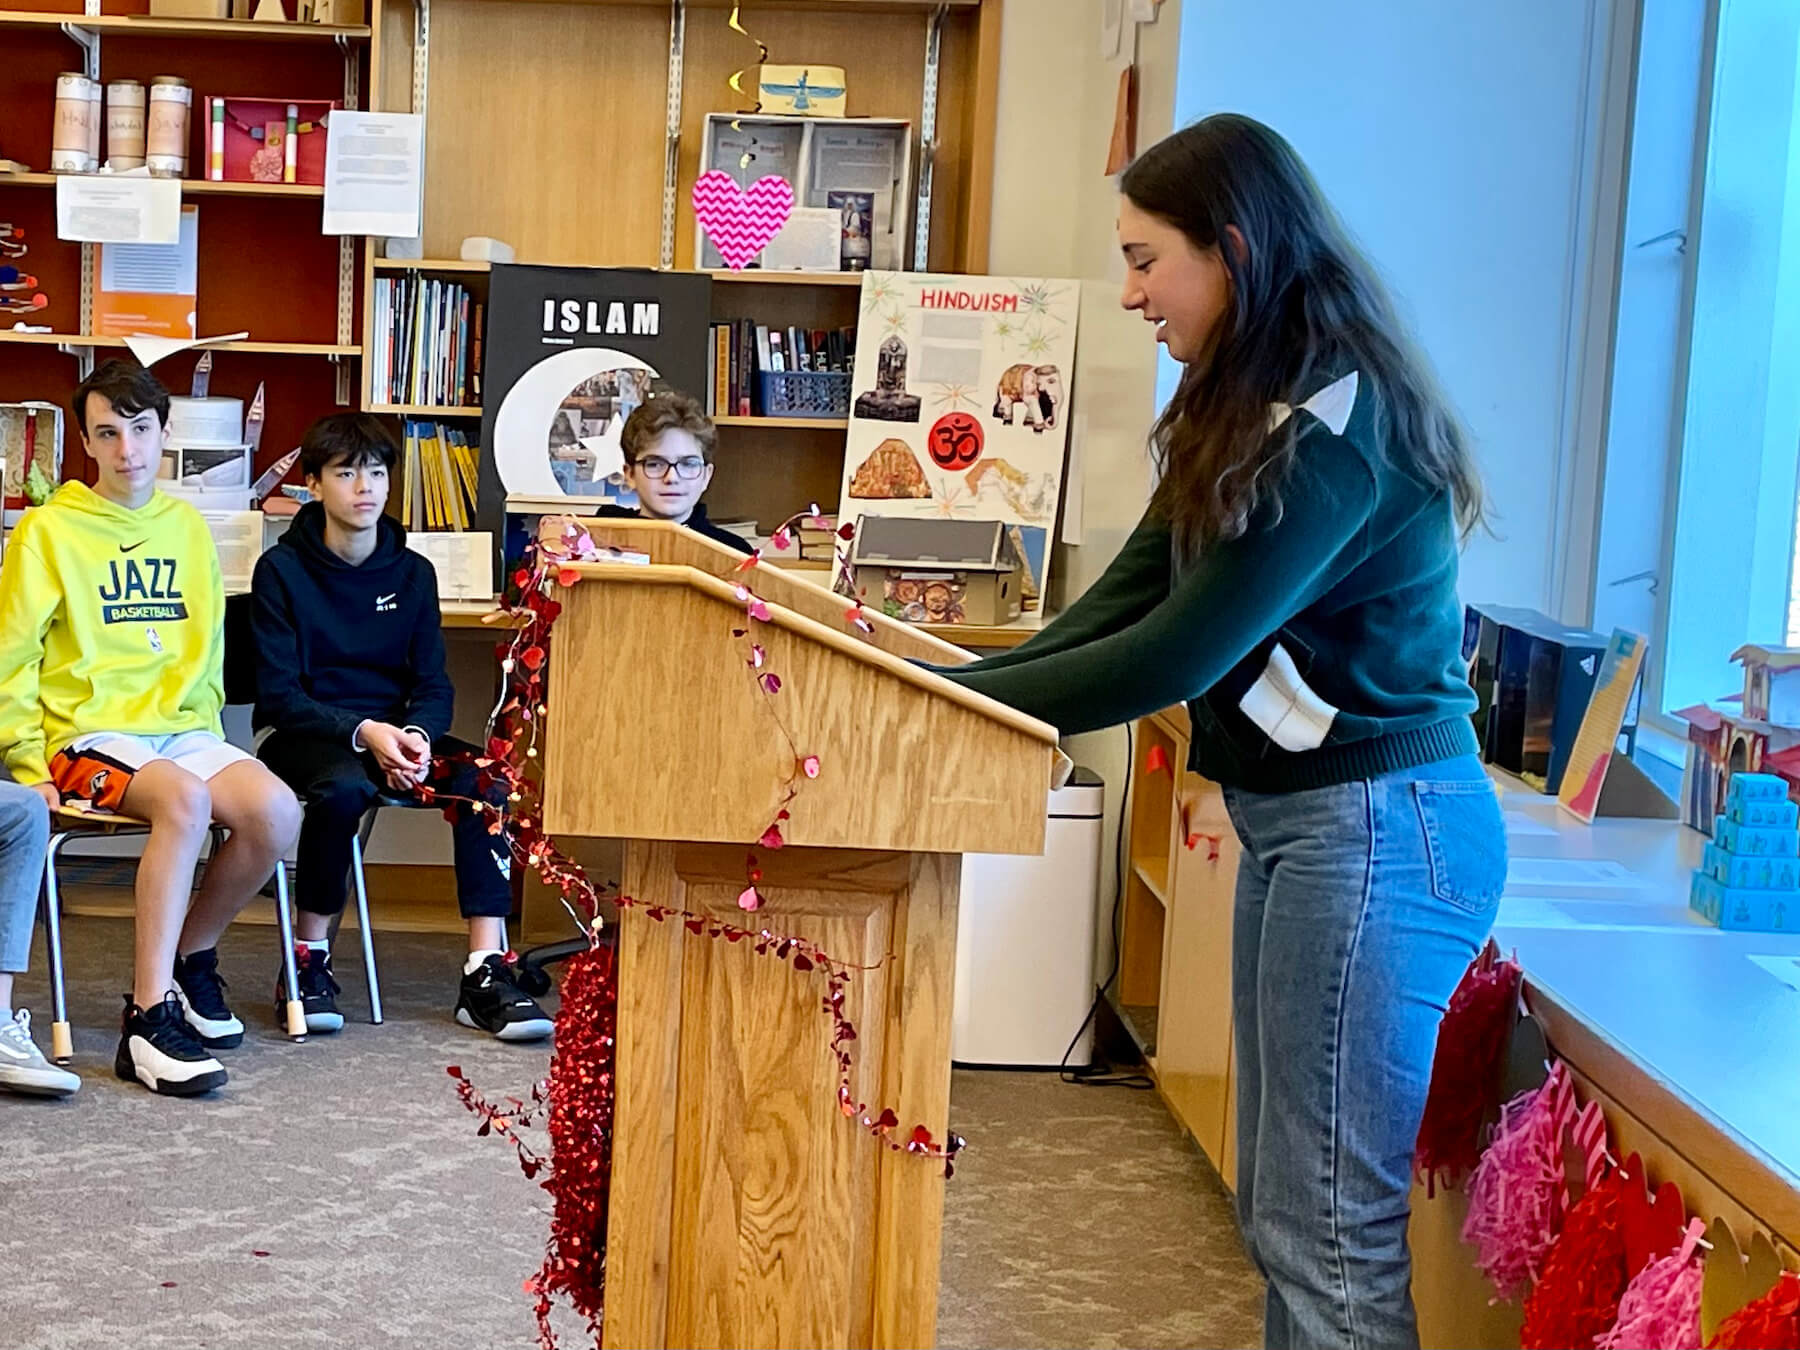 Ethical Culture Fieldston School Middle School Students assemble for Love is Love poetry reading